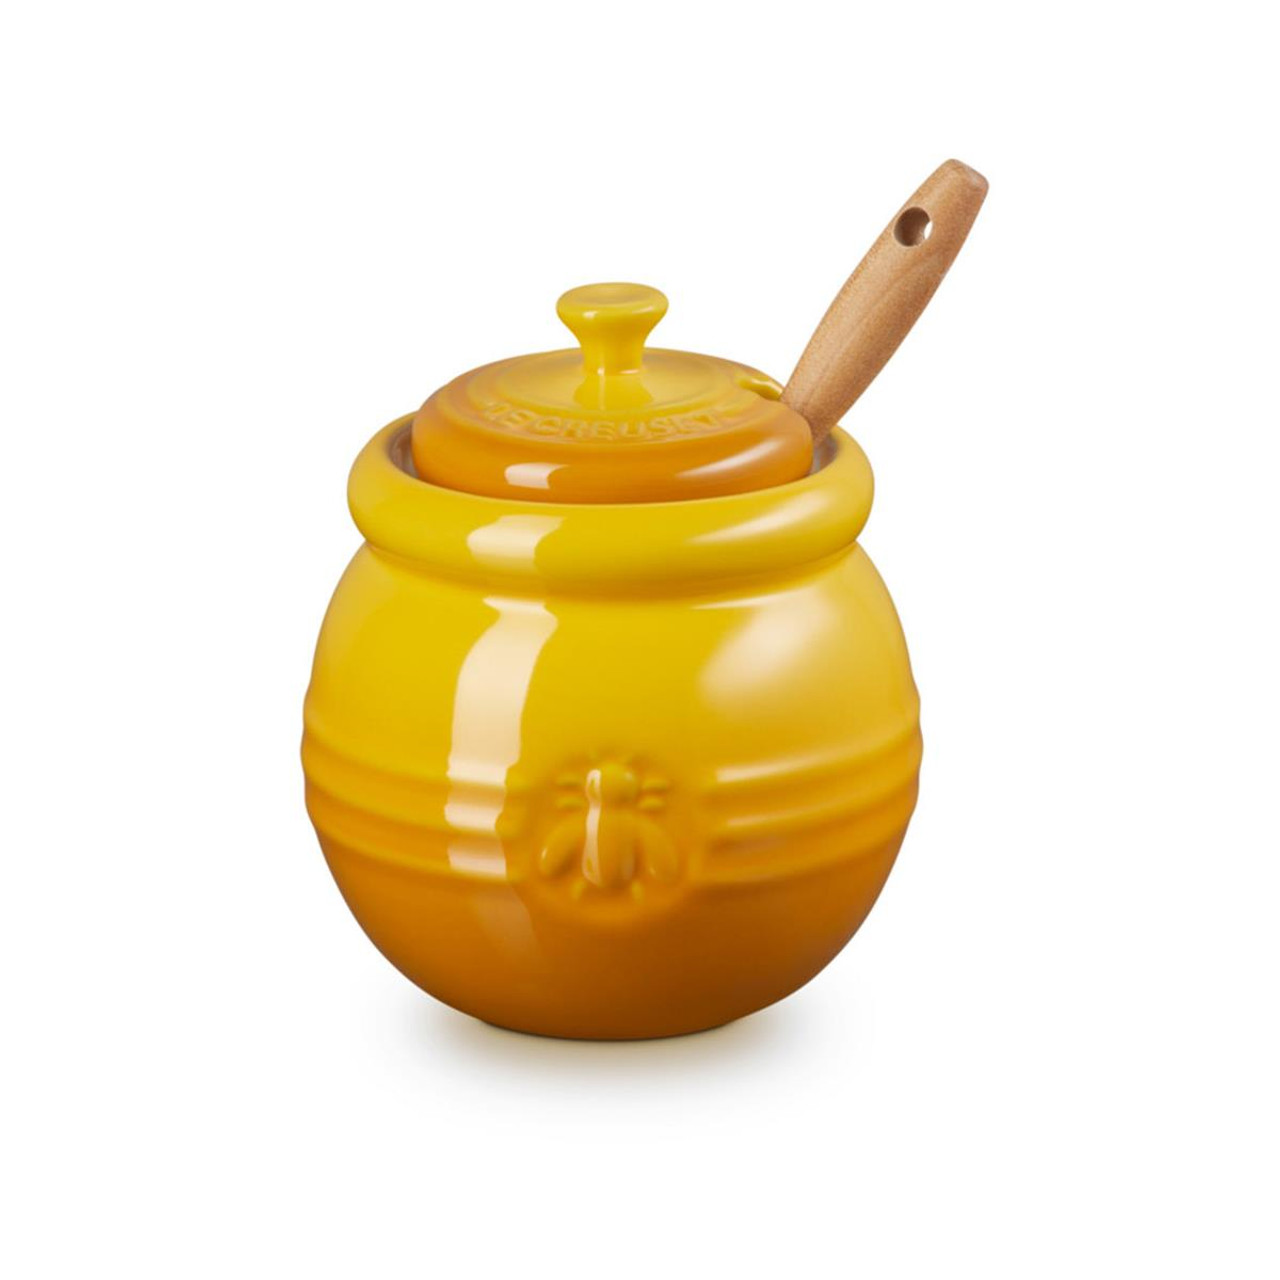 What are the features of the Le Creuset Honey Pot with Dipper?